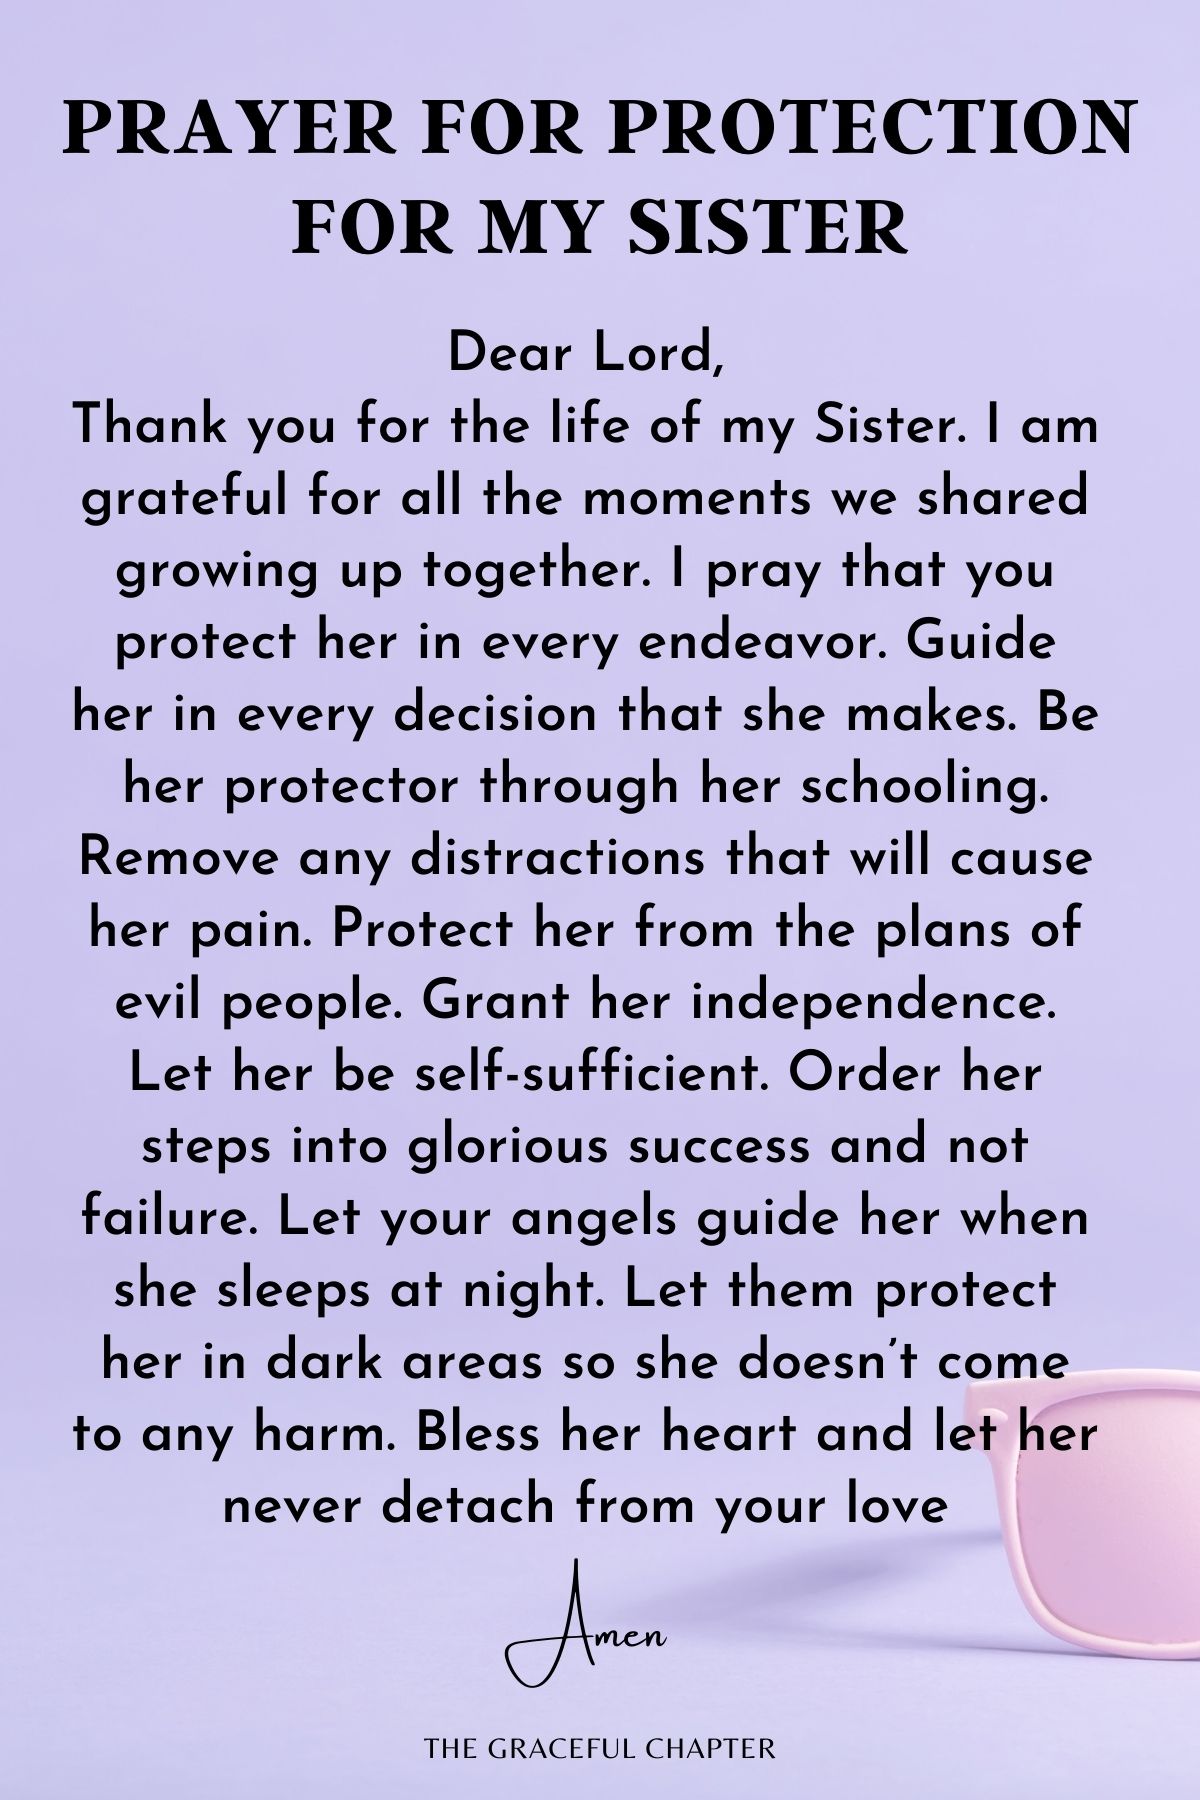 Prayer for Protection for my Sister